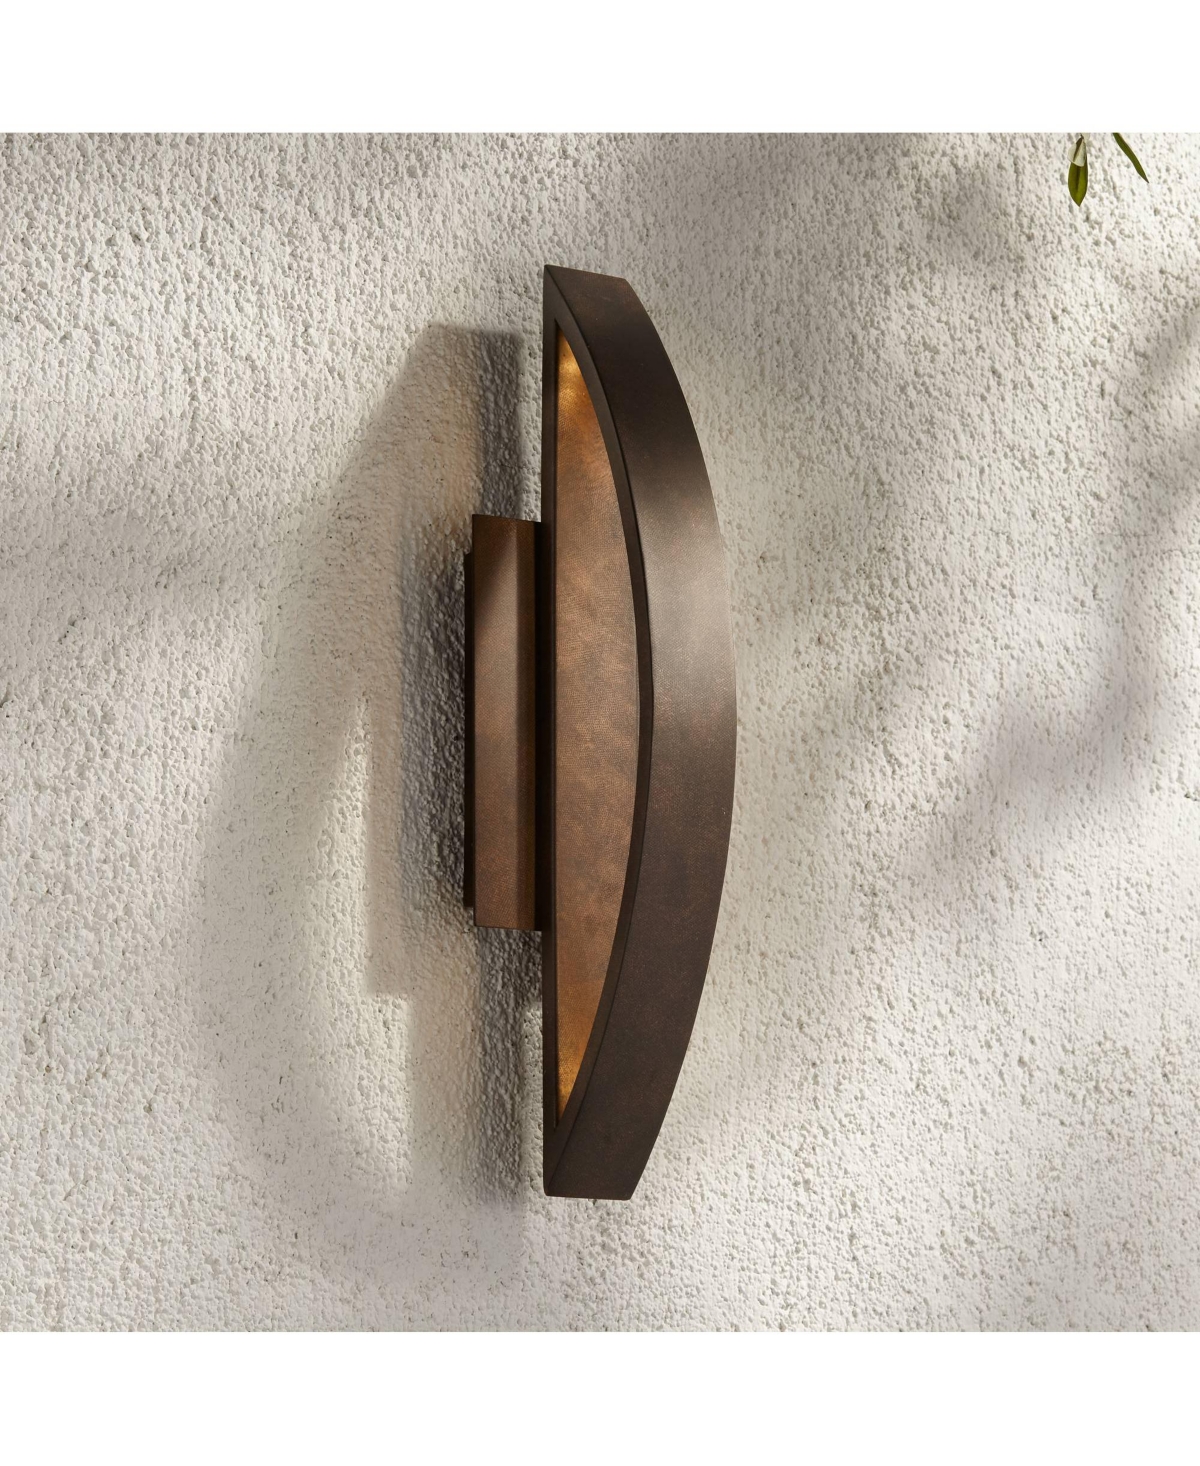 Modern Outdoor Wall Light Fixture Led Mottled Coppered Bronze Brown 20 1/2" Arching Steel Frame for Exterior House Porch Patio Outside Deck Garage Yar